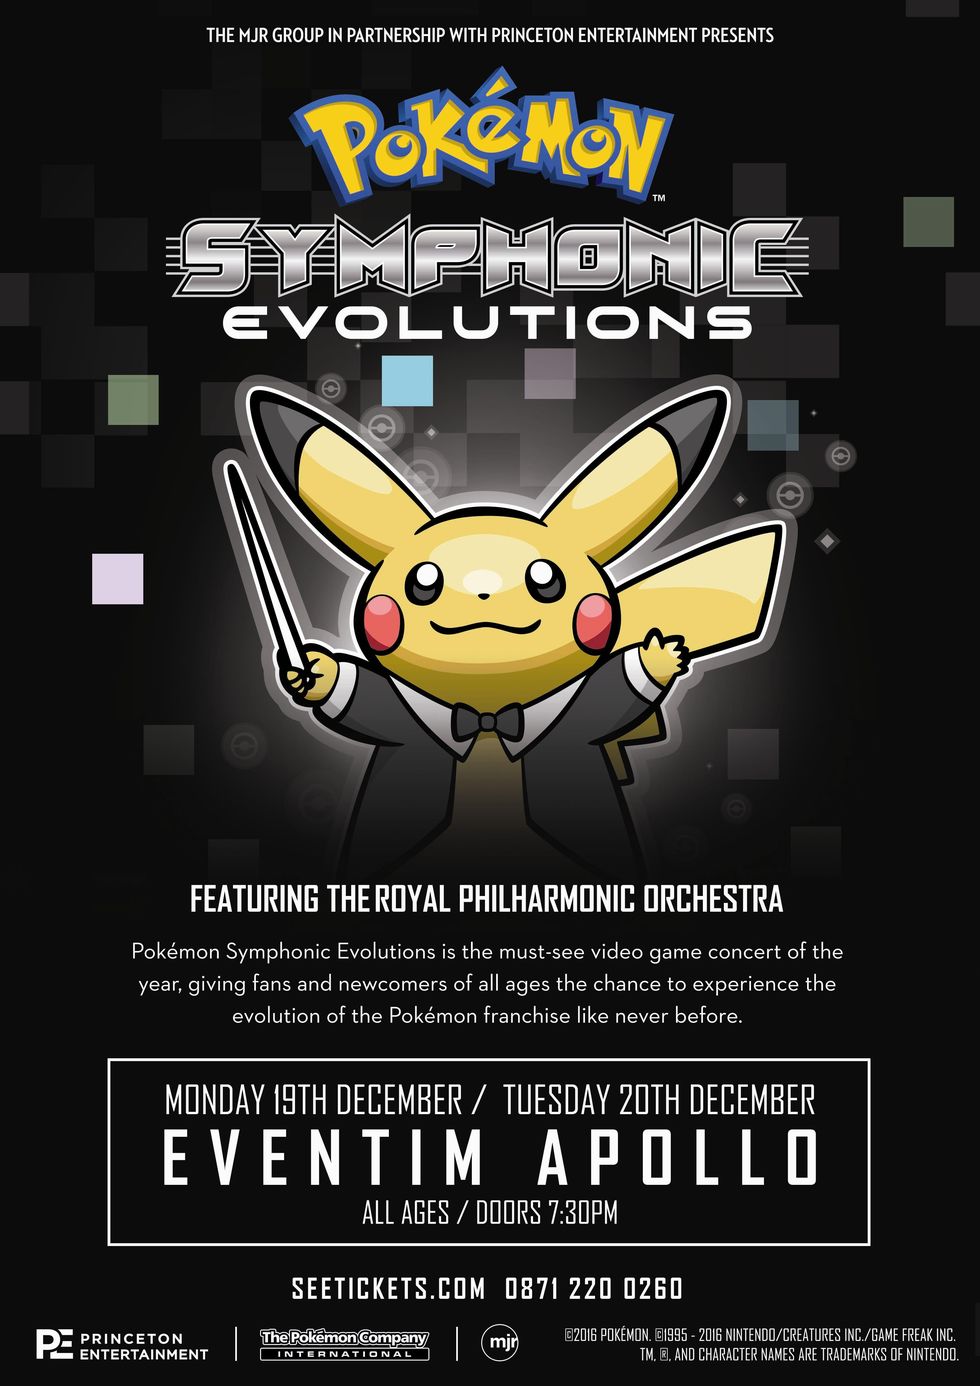 A Pokémon orchestral concert is coming to London